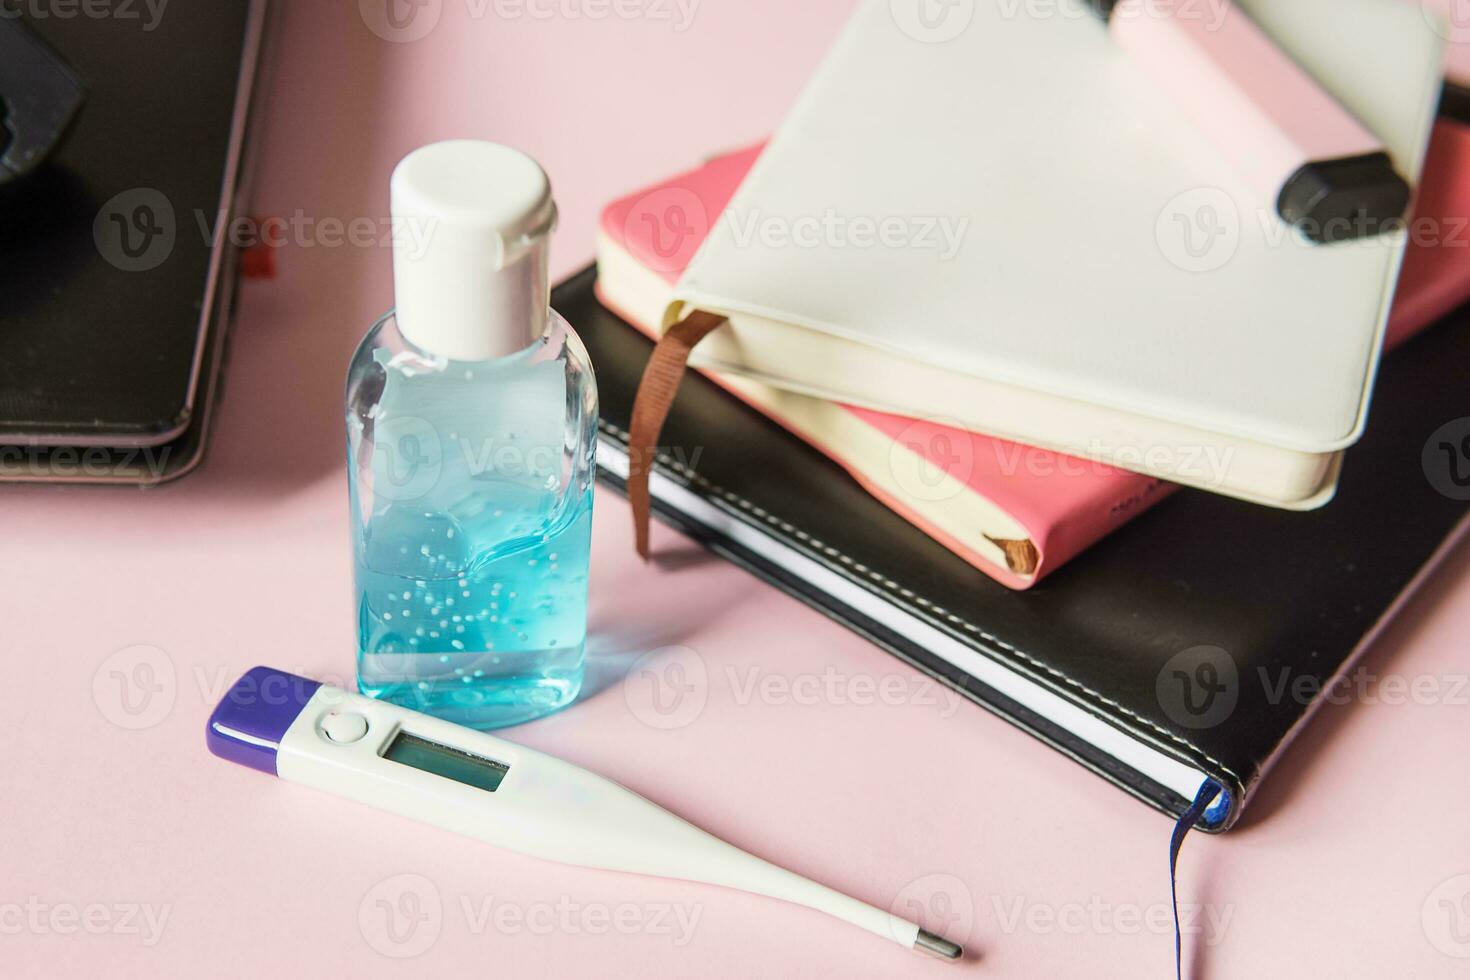 On the desktop, a close-up of a thermometer and hand gel, as well as notebooks, a marker and a laptop. Work from home using an online device protection from coronavirus during the quarantine period. photo